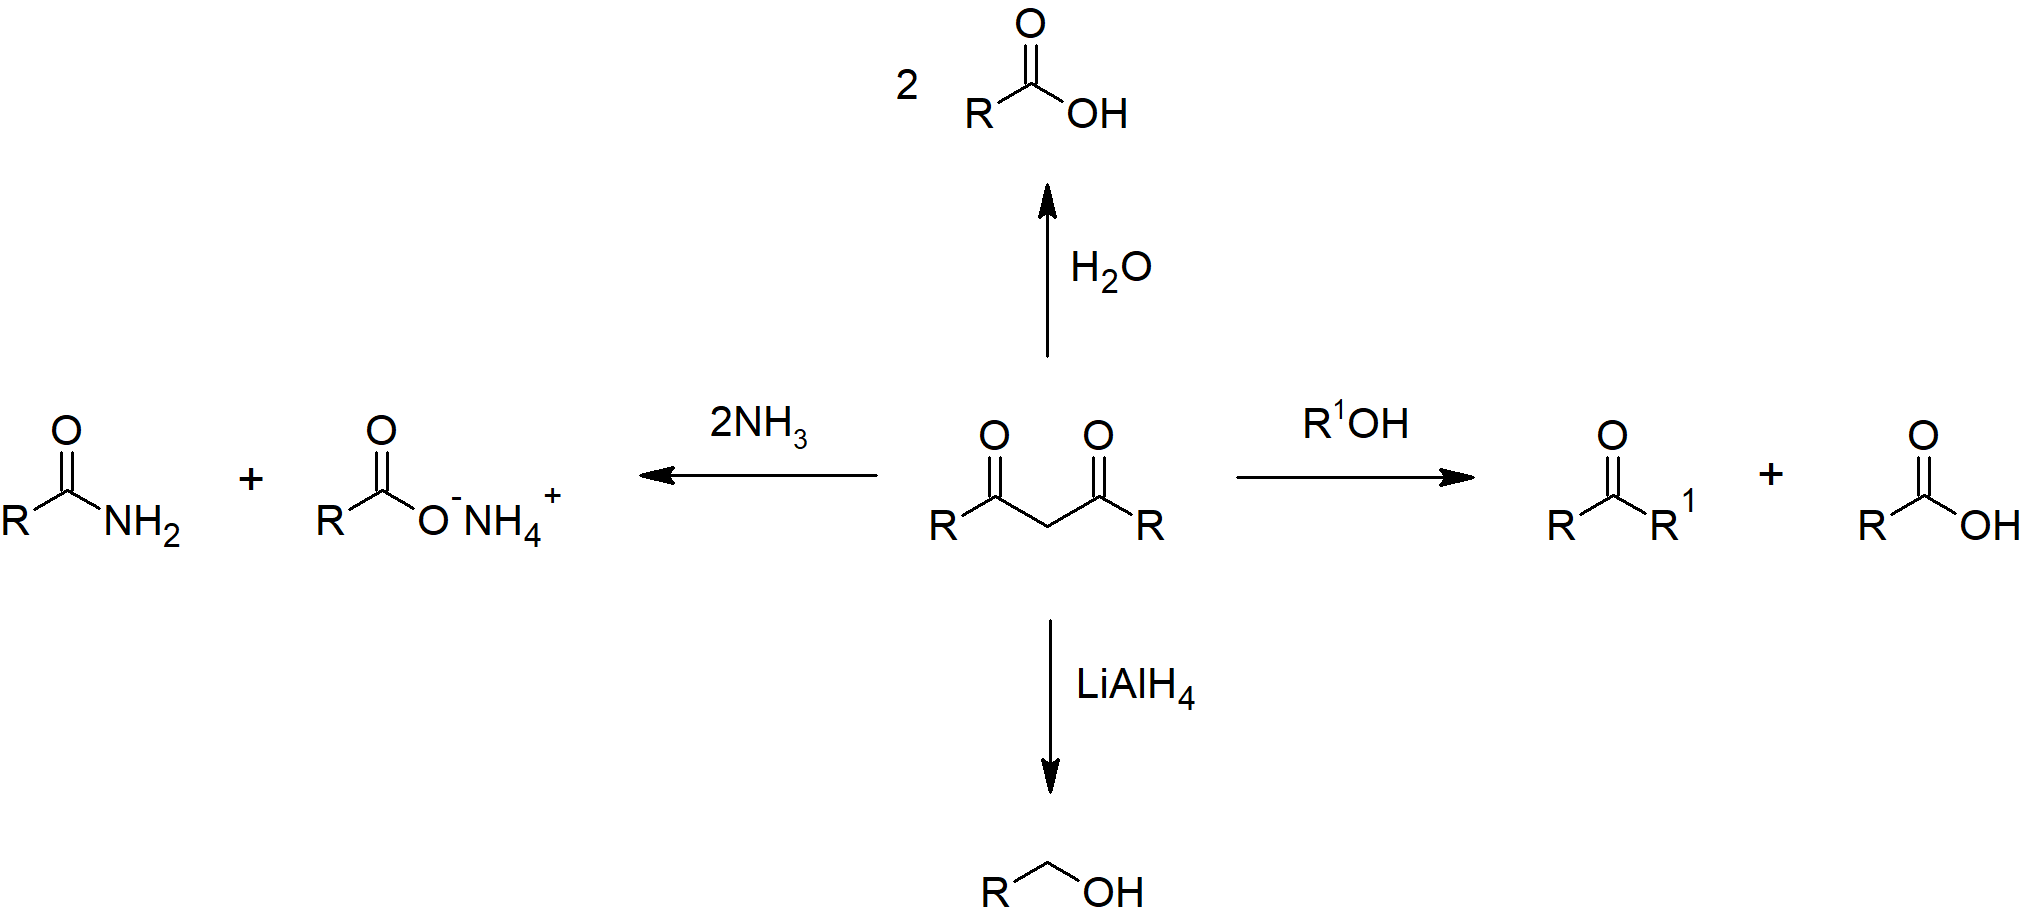 Acid Anhydride Reactions.png